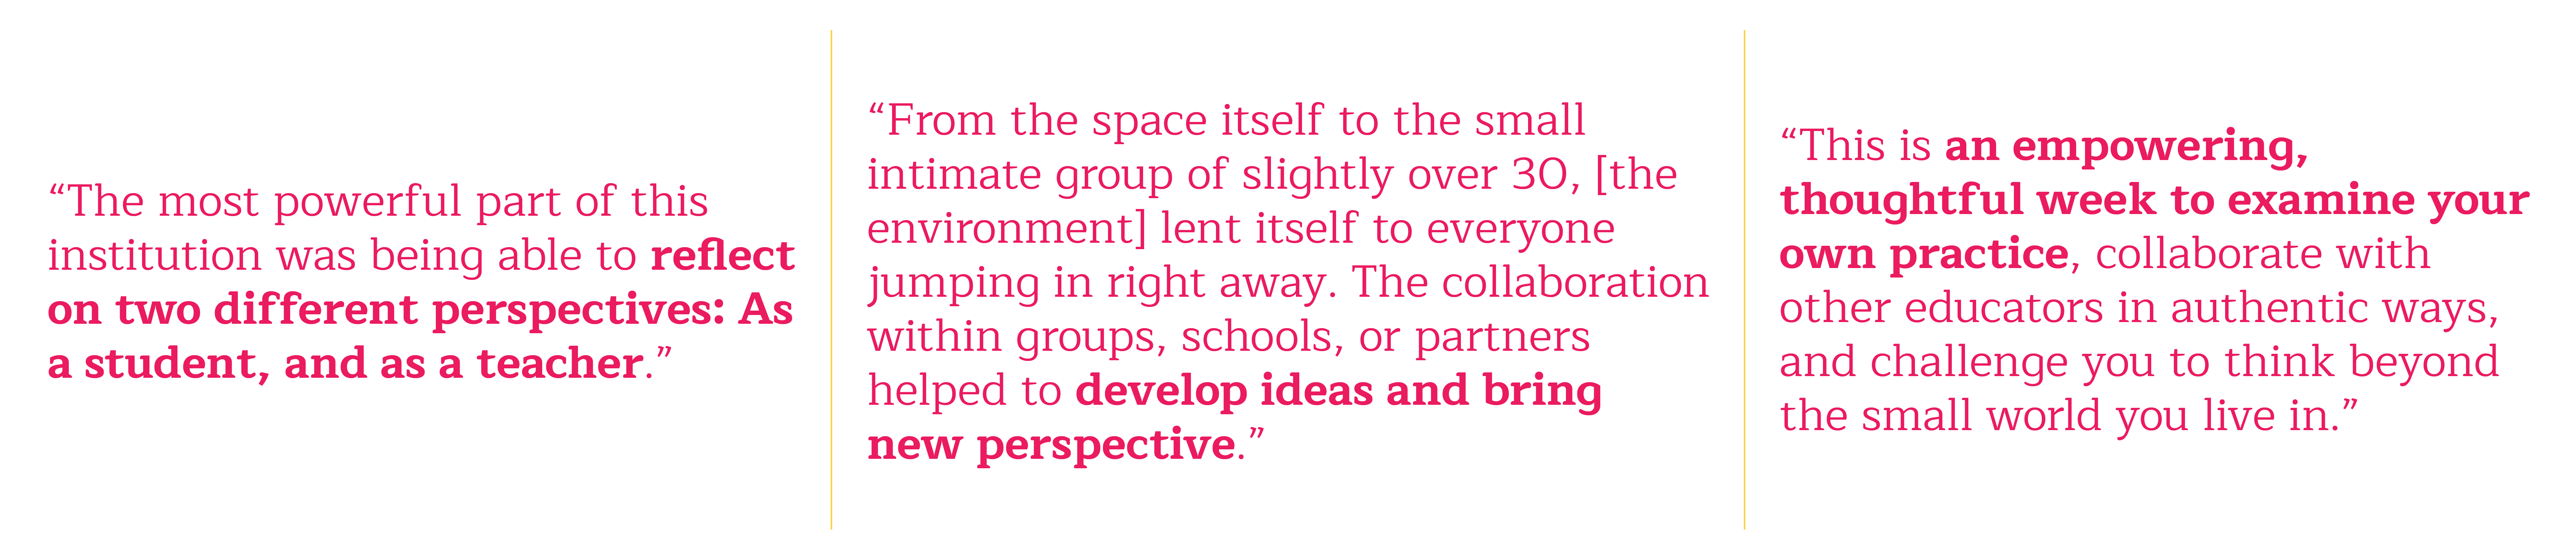 [Image Text] The most powerful part of this institution was being able to reflect on two different perspectives: As a student and as a teacher. The environment. From the space itself to the small intimate group of slightly over 30, it lent itself to everyone jumping in right away. The collaboration within groups, schools, or partners helped to develop ideas and bring new perspective. This is an empowering, thoughtful week to examine your own practice, collaborate with other educators in authentic ways, and challenge you to think beyond the small world you live in.